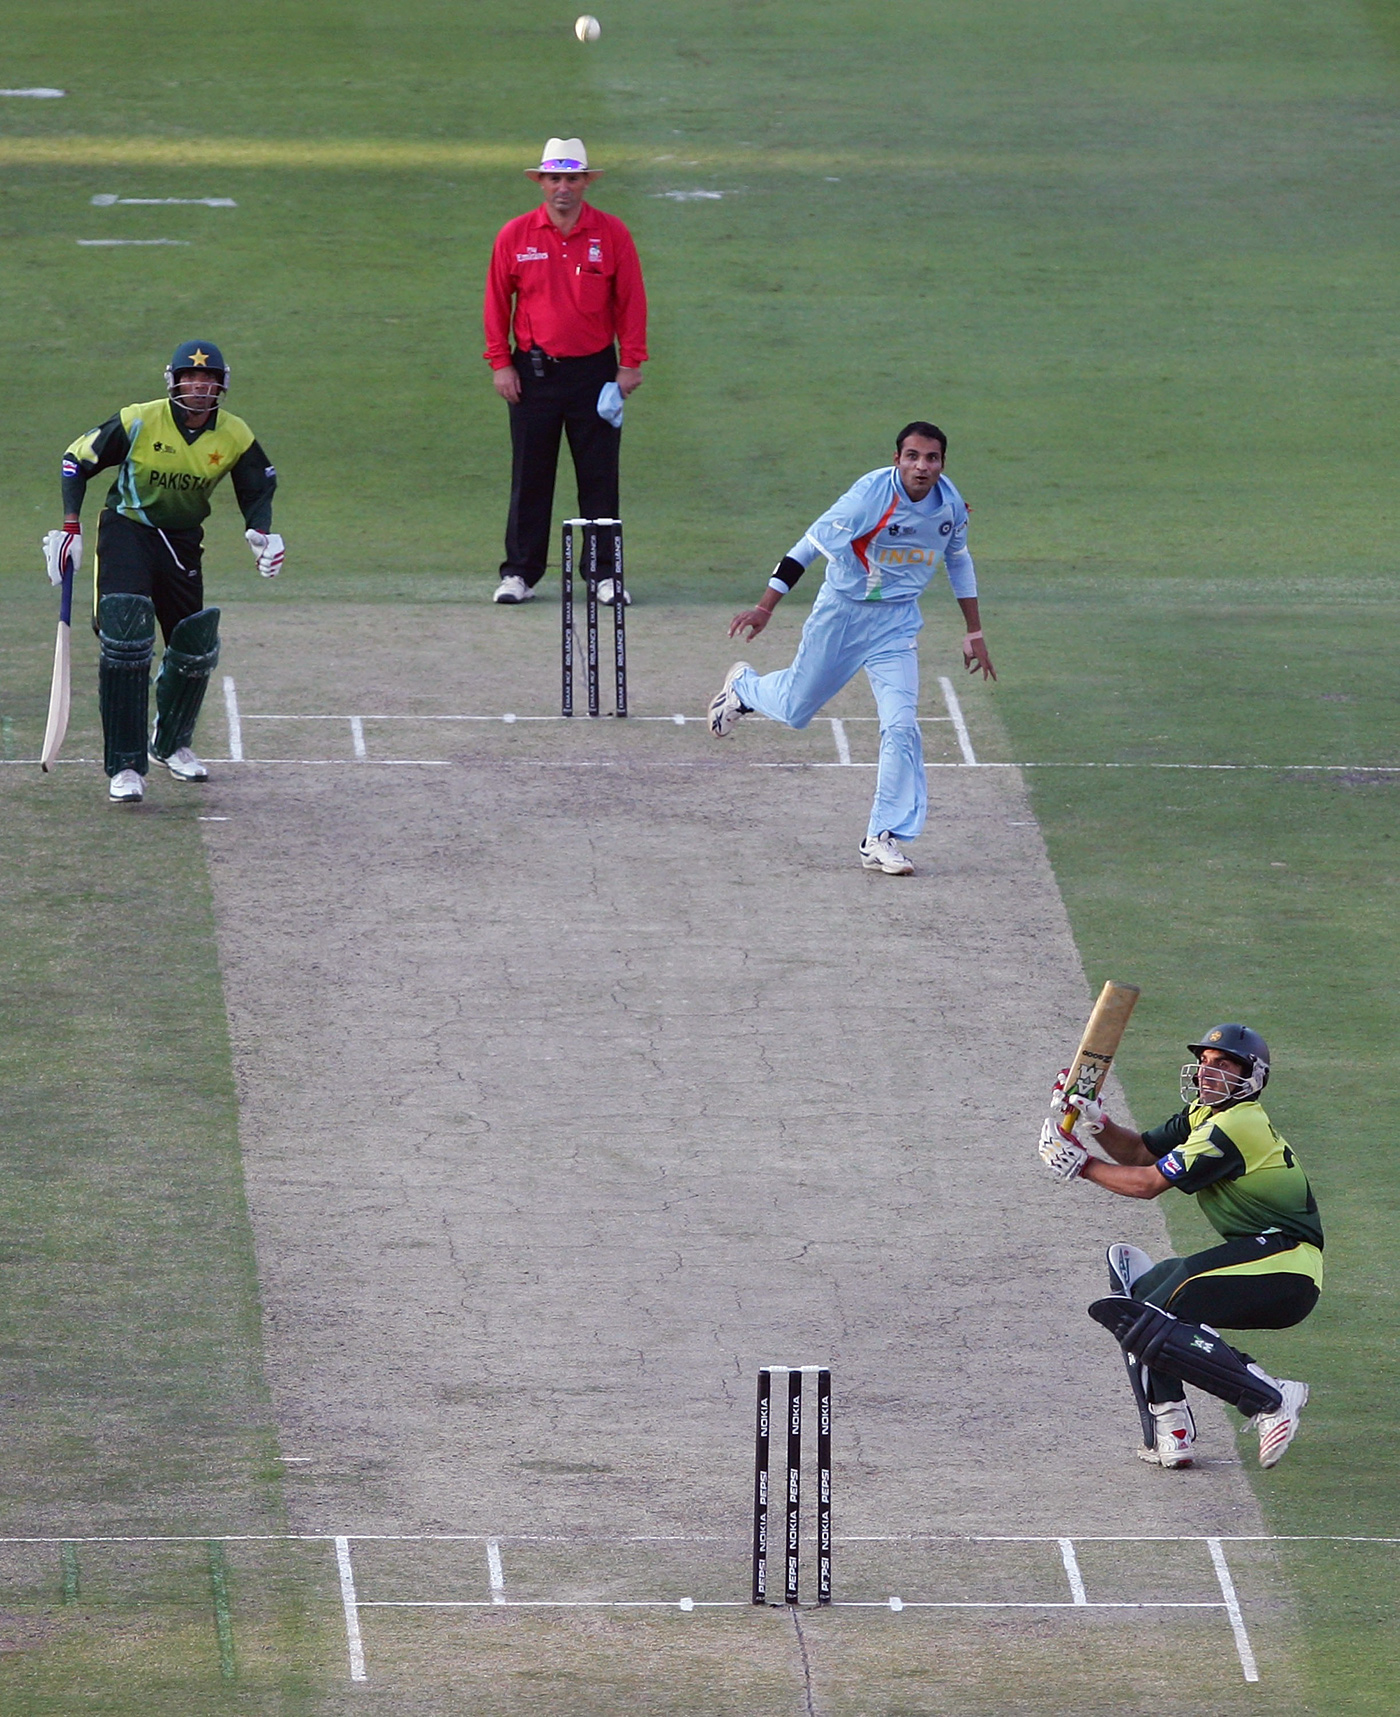 The moment we lost Twenty20 World Cup